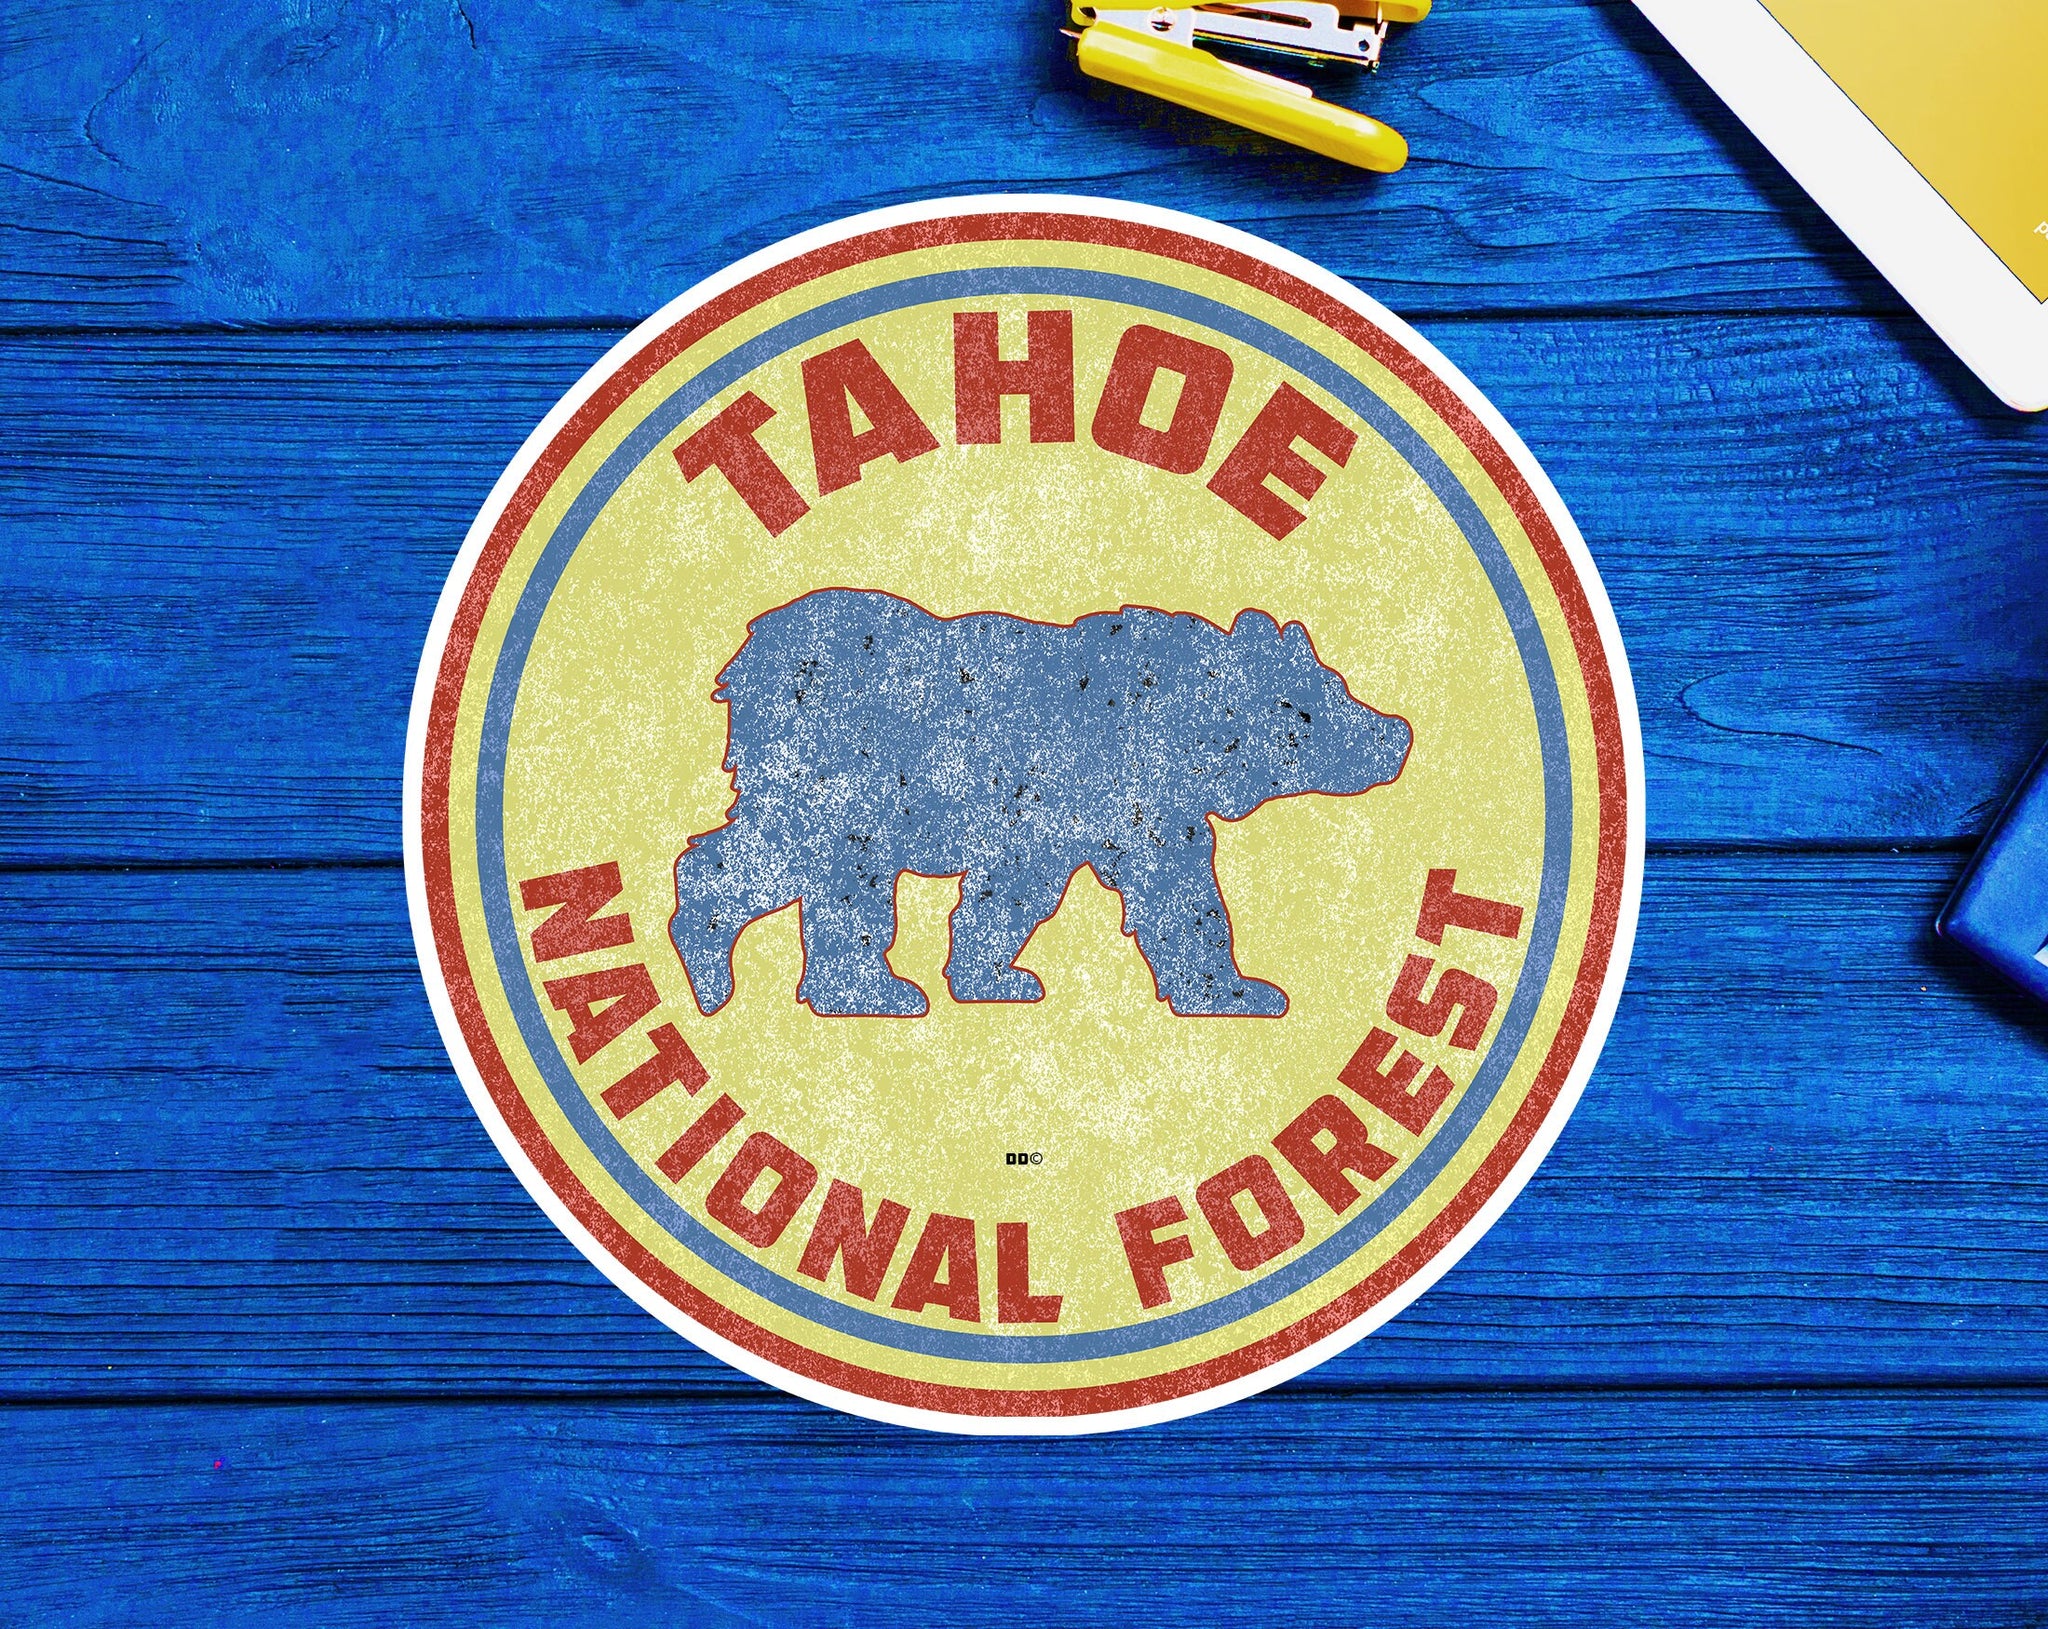 Lake Tahoe National Forest California Bear Decal Sticker 3"